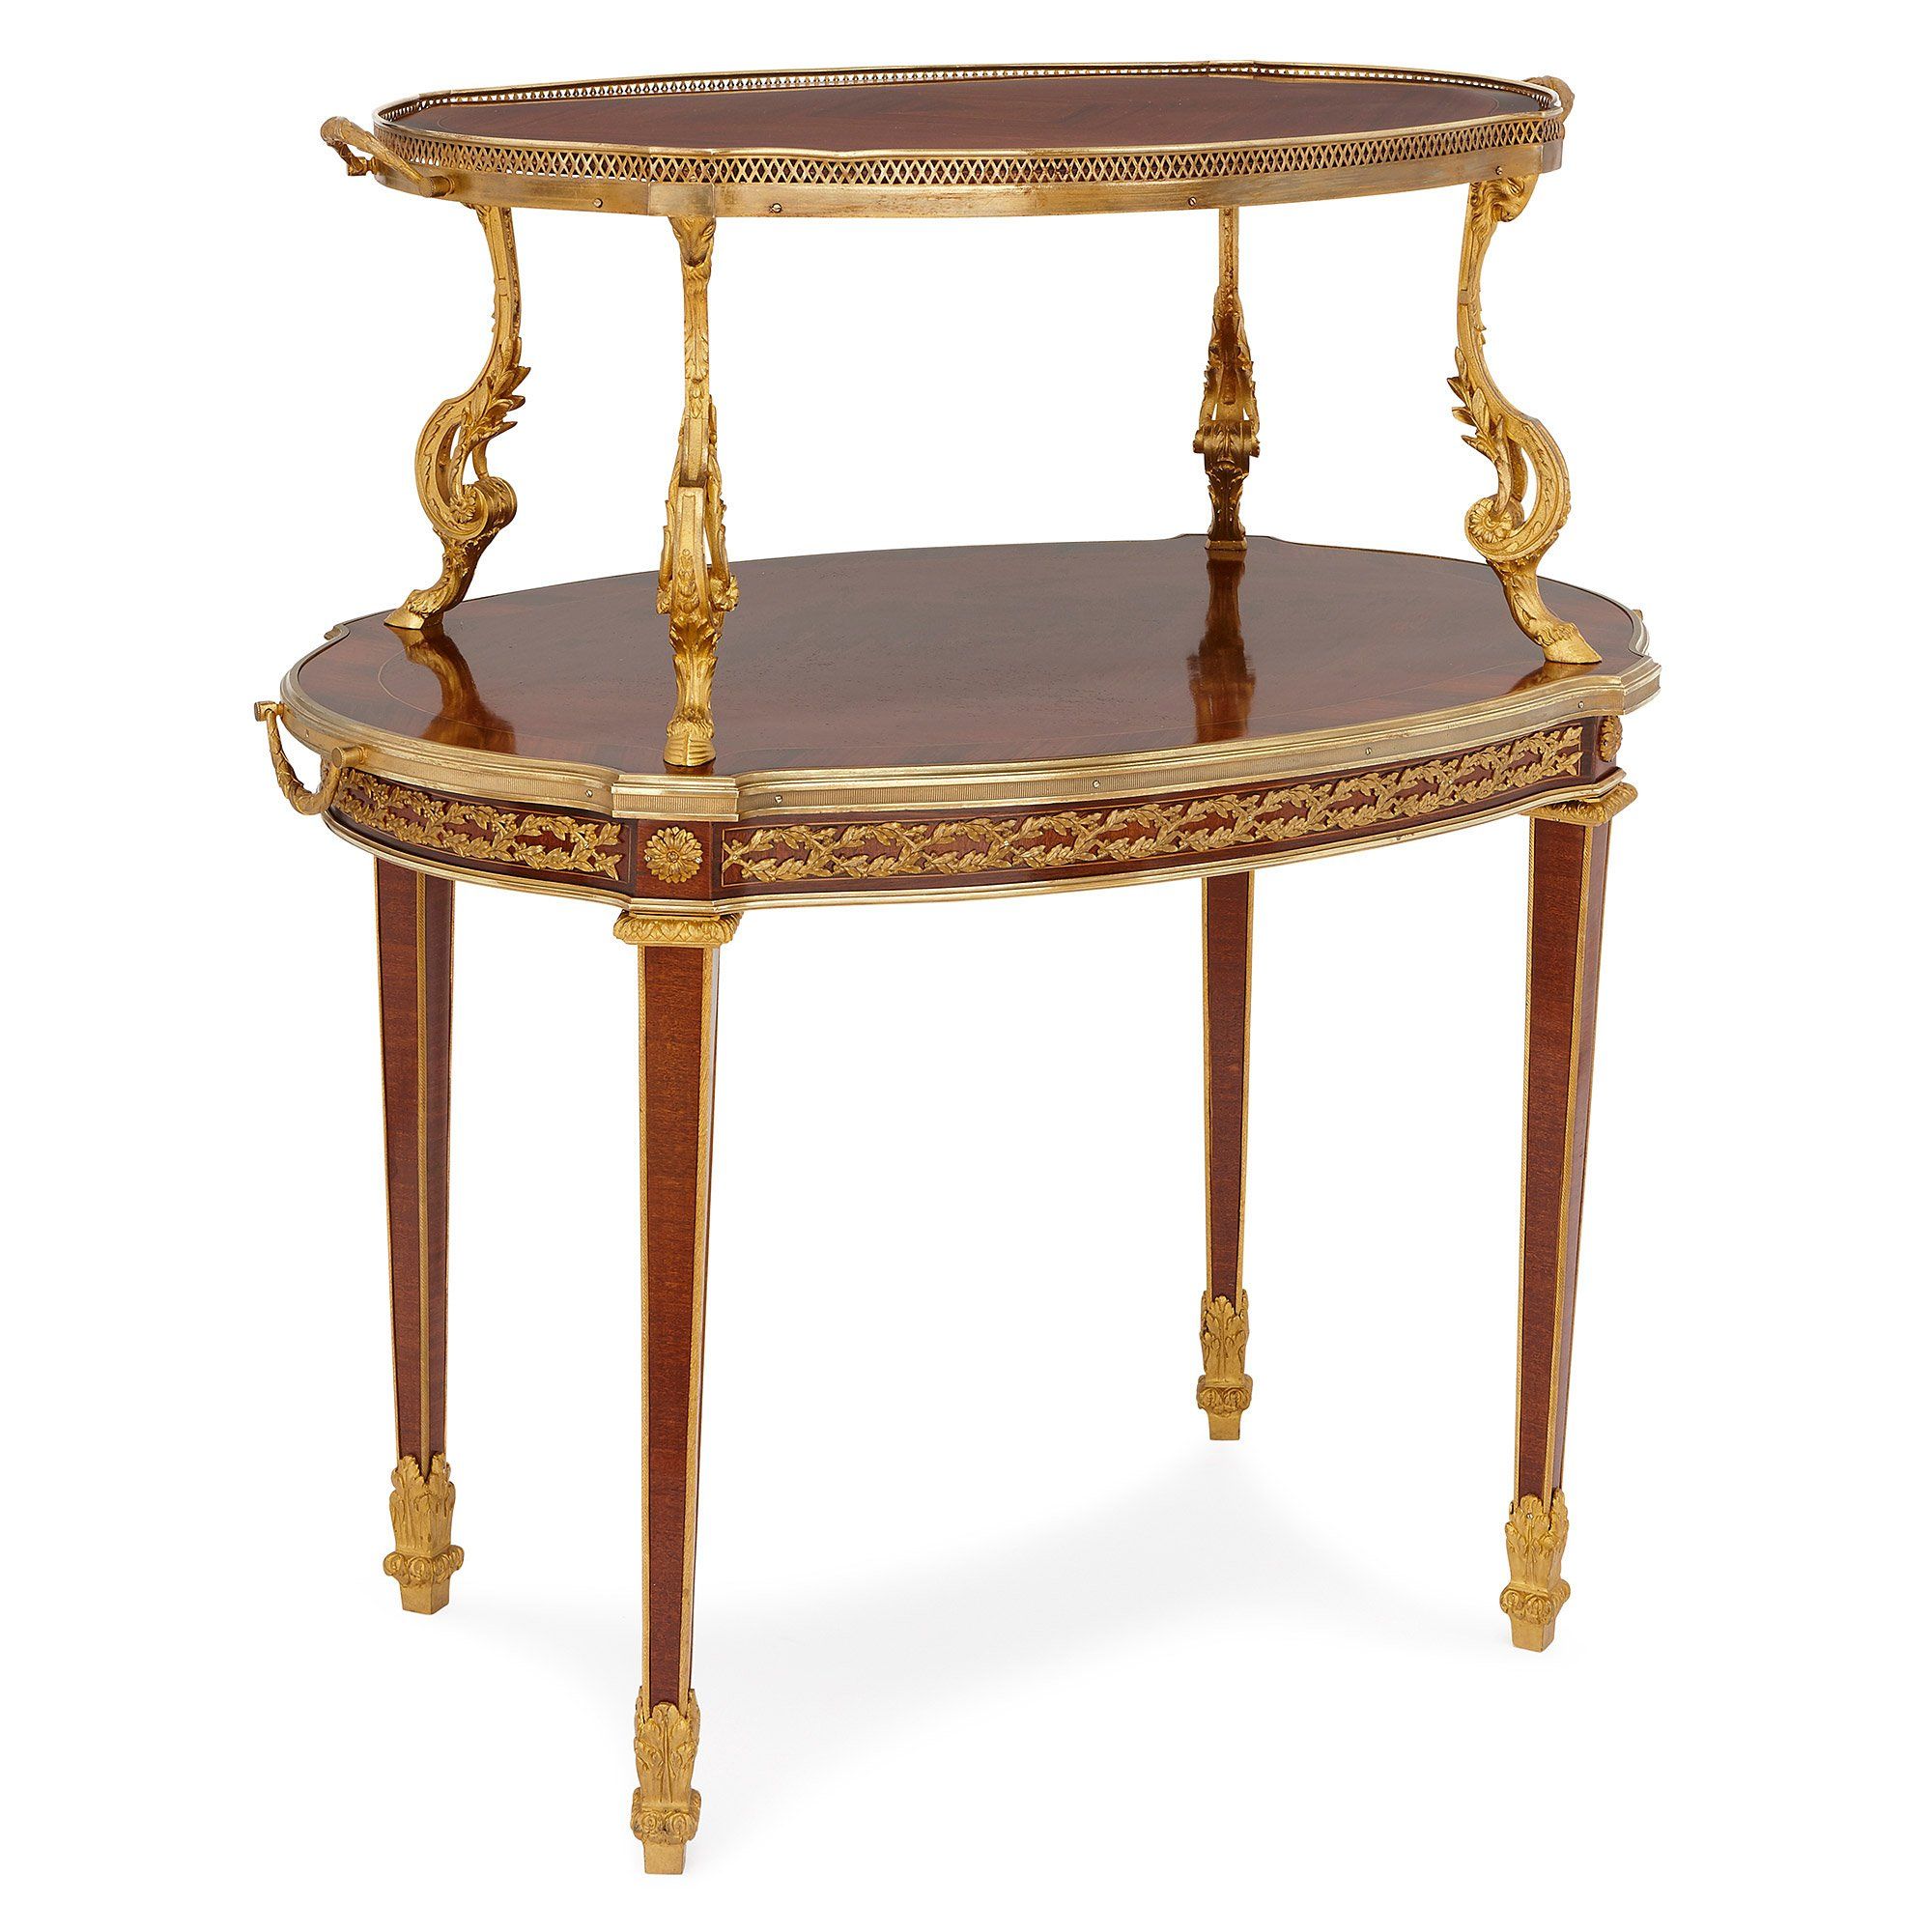 Circa 1900 French Louis XVI Style Occasional Table with Parquetry